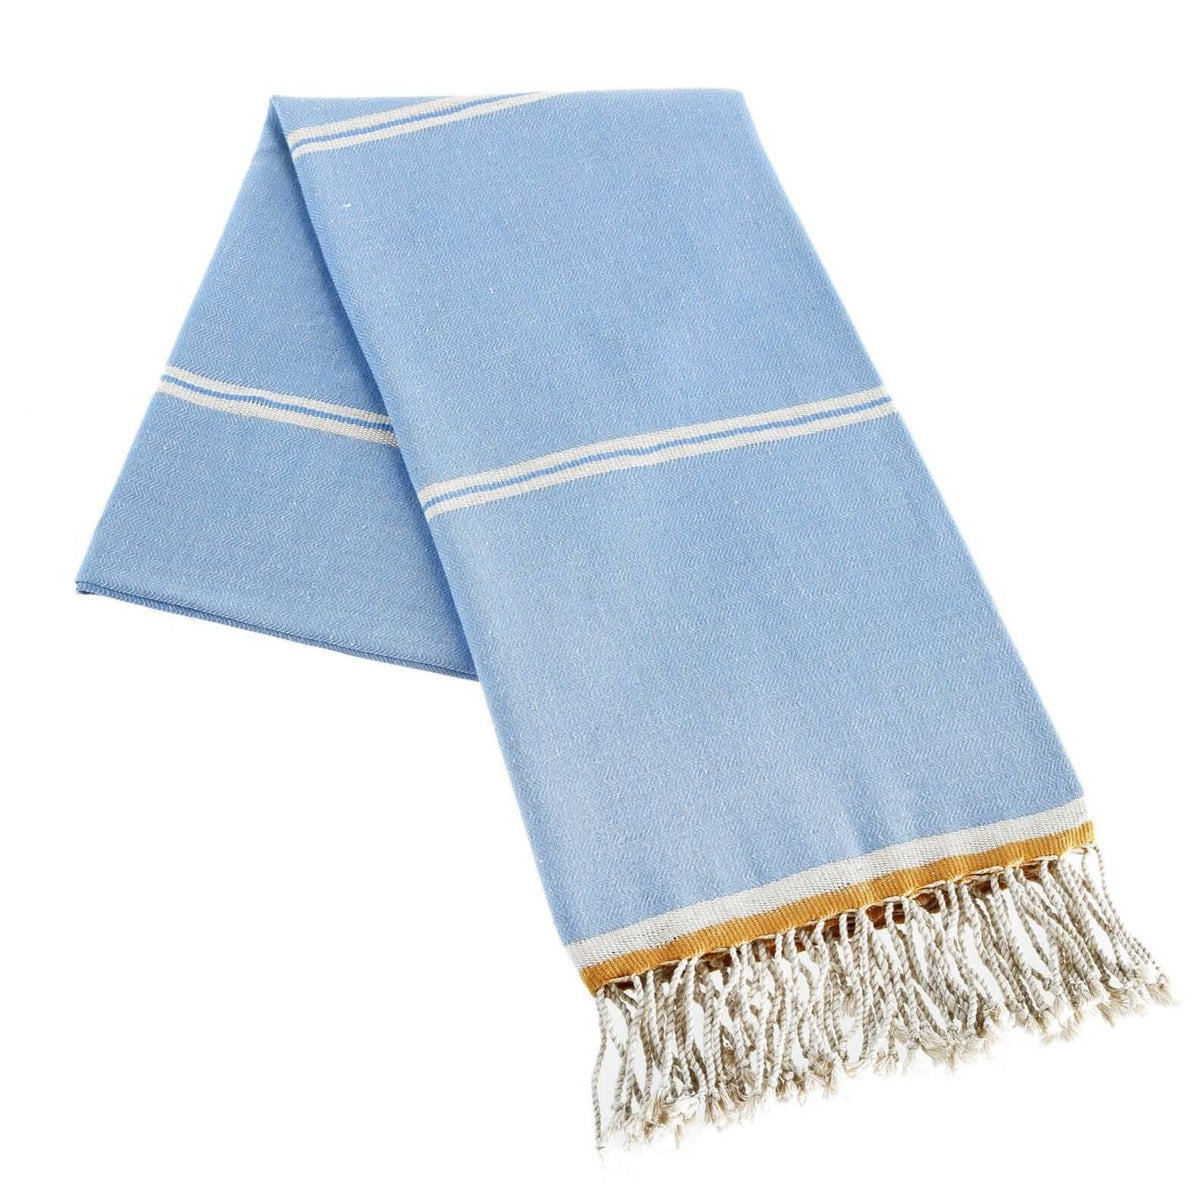 Turkish Beach Towels 100% Cotton, 39 x 69 Inches, Pre-Washed, High